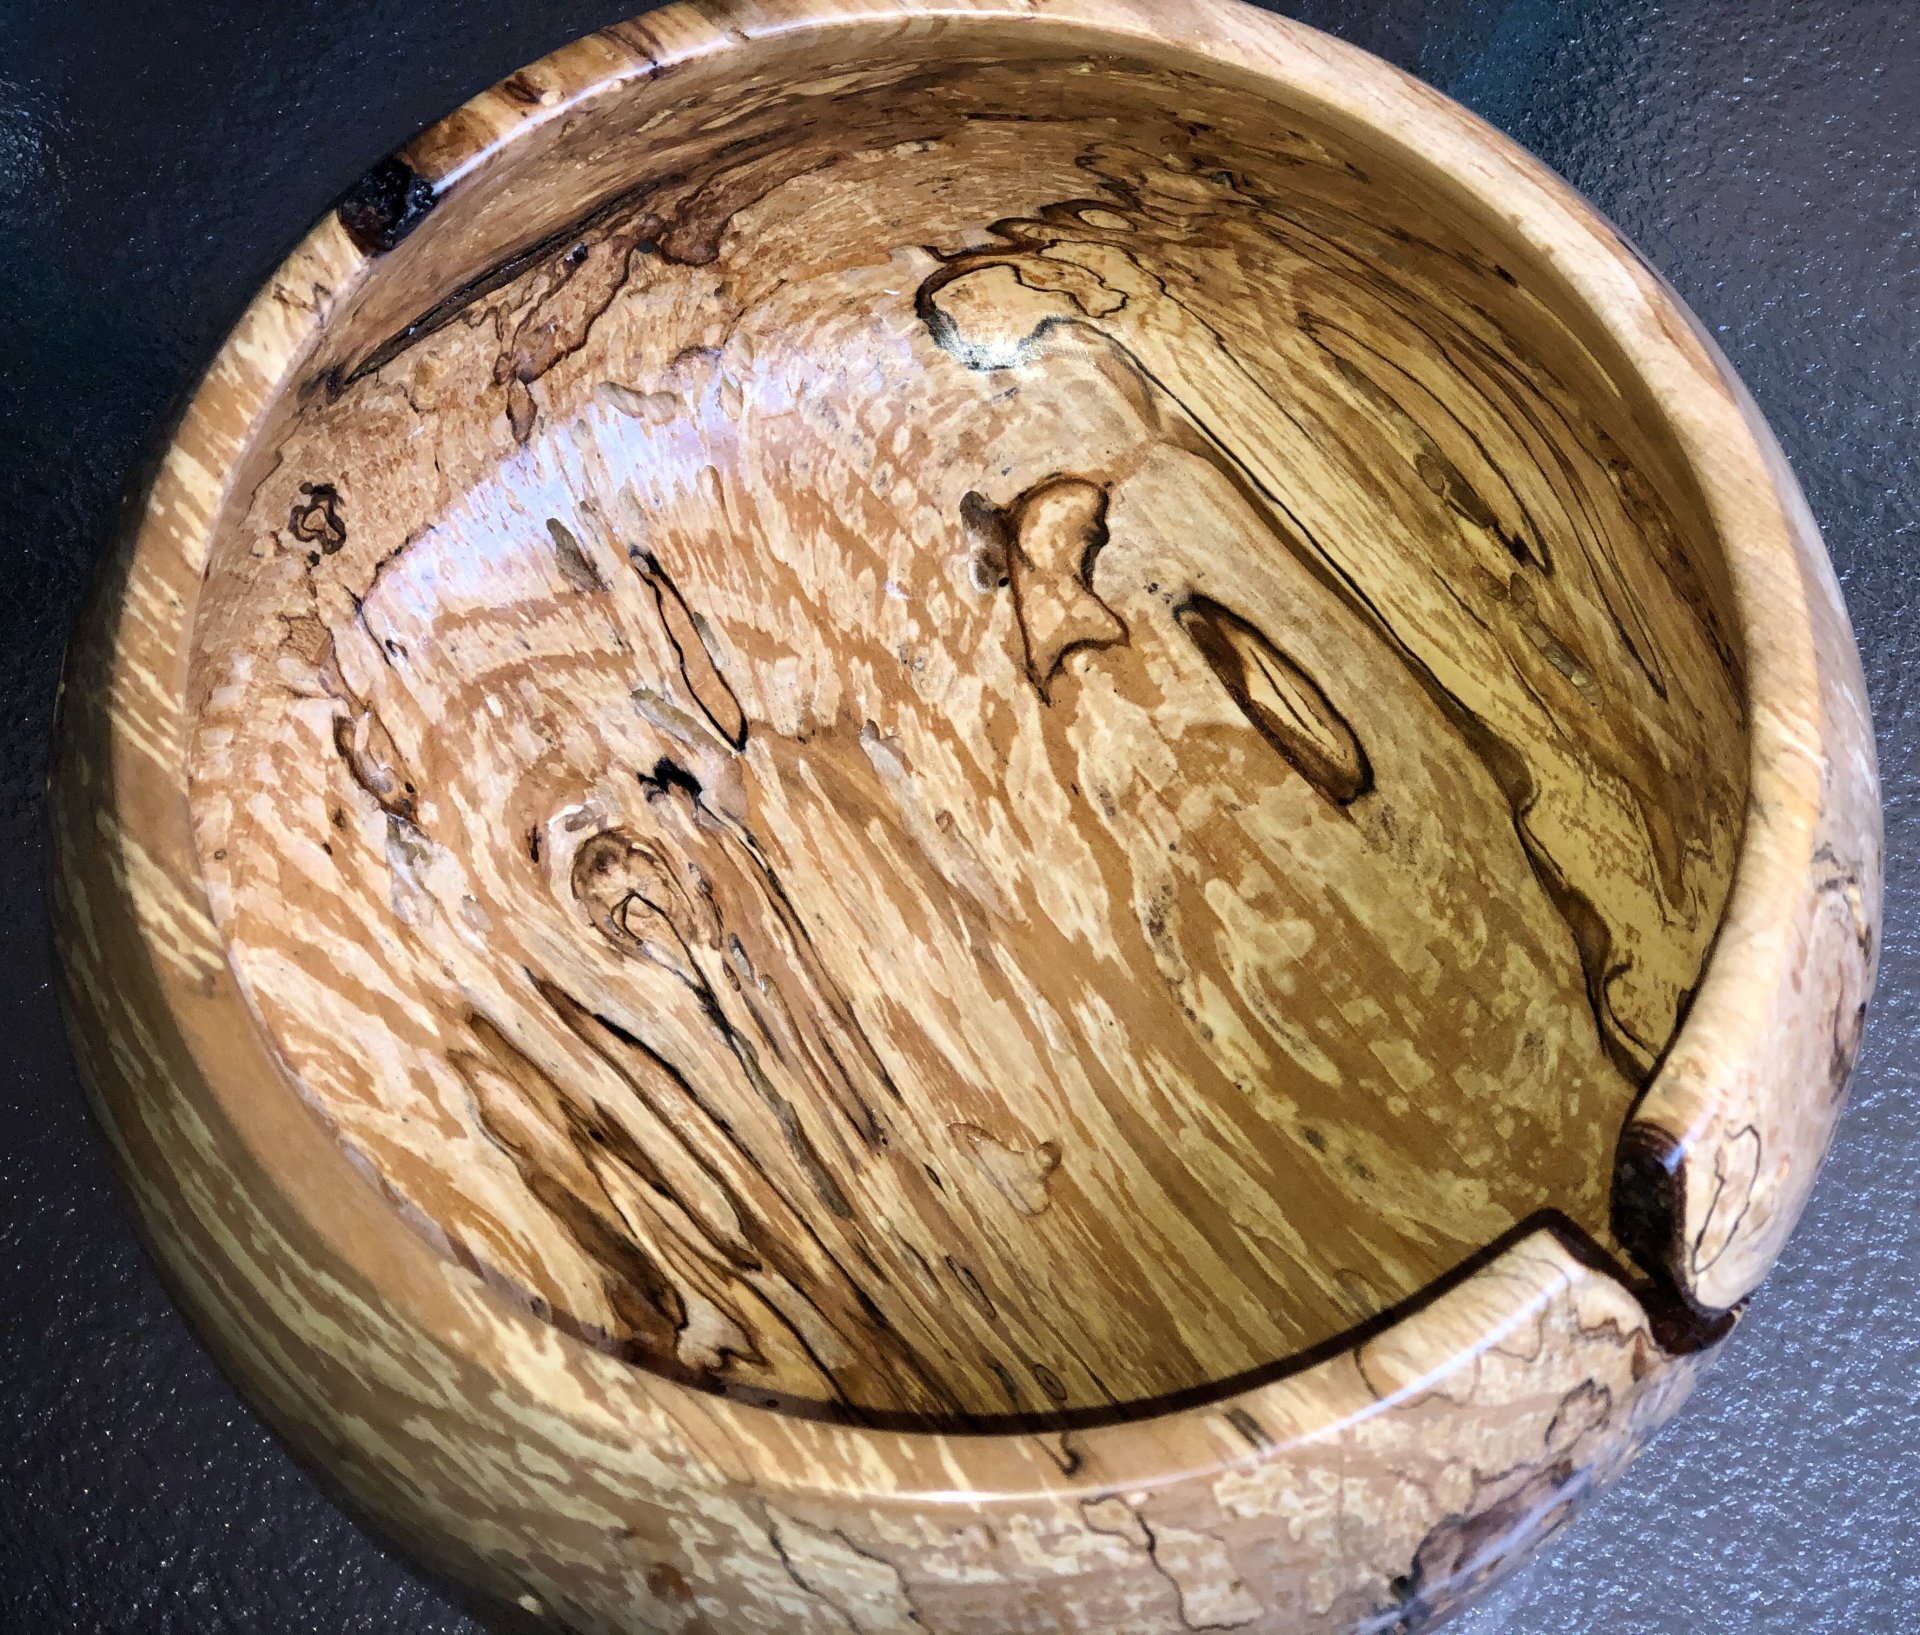 Another spalted maple vessel